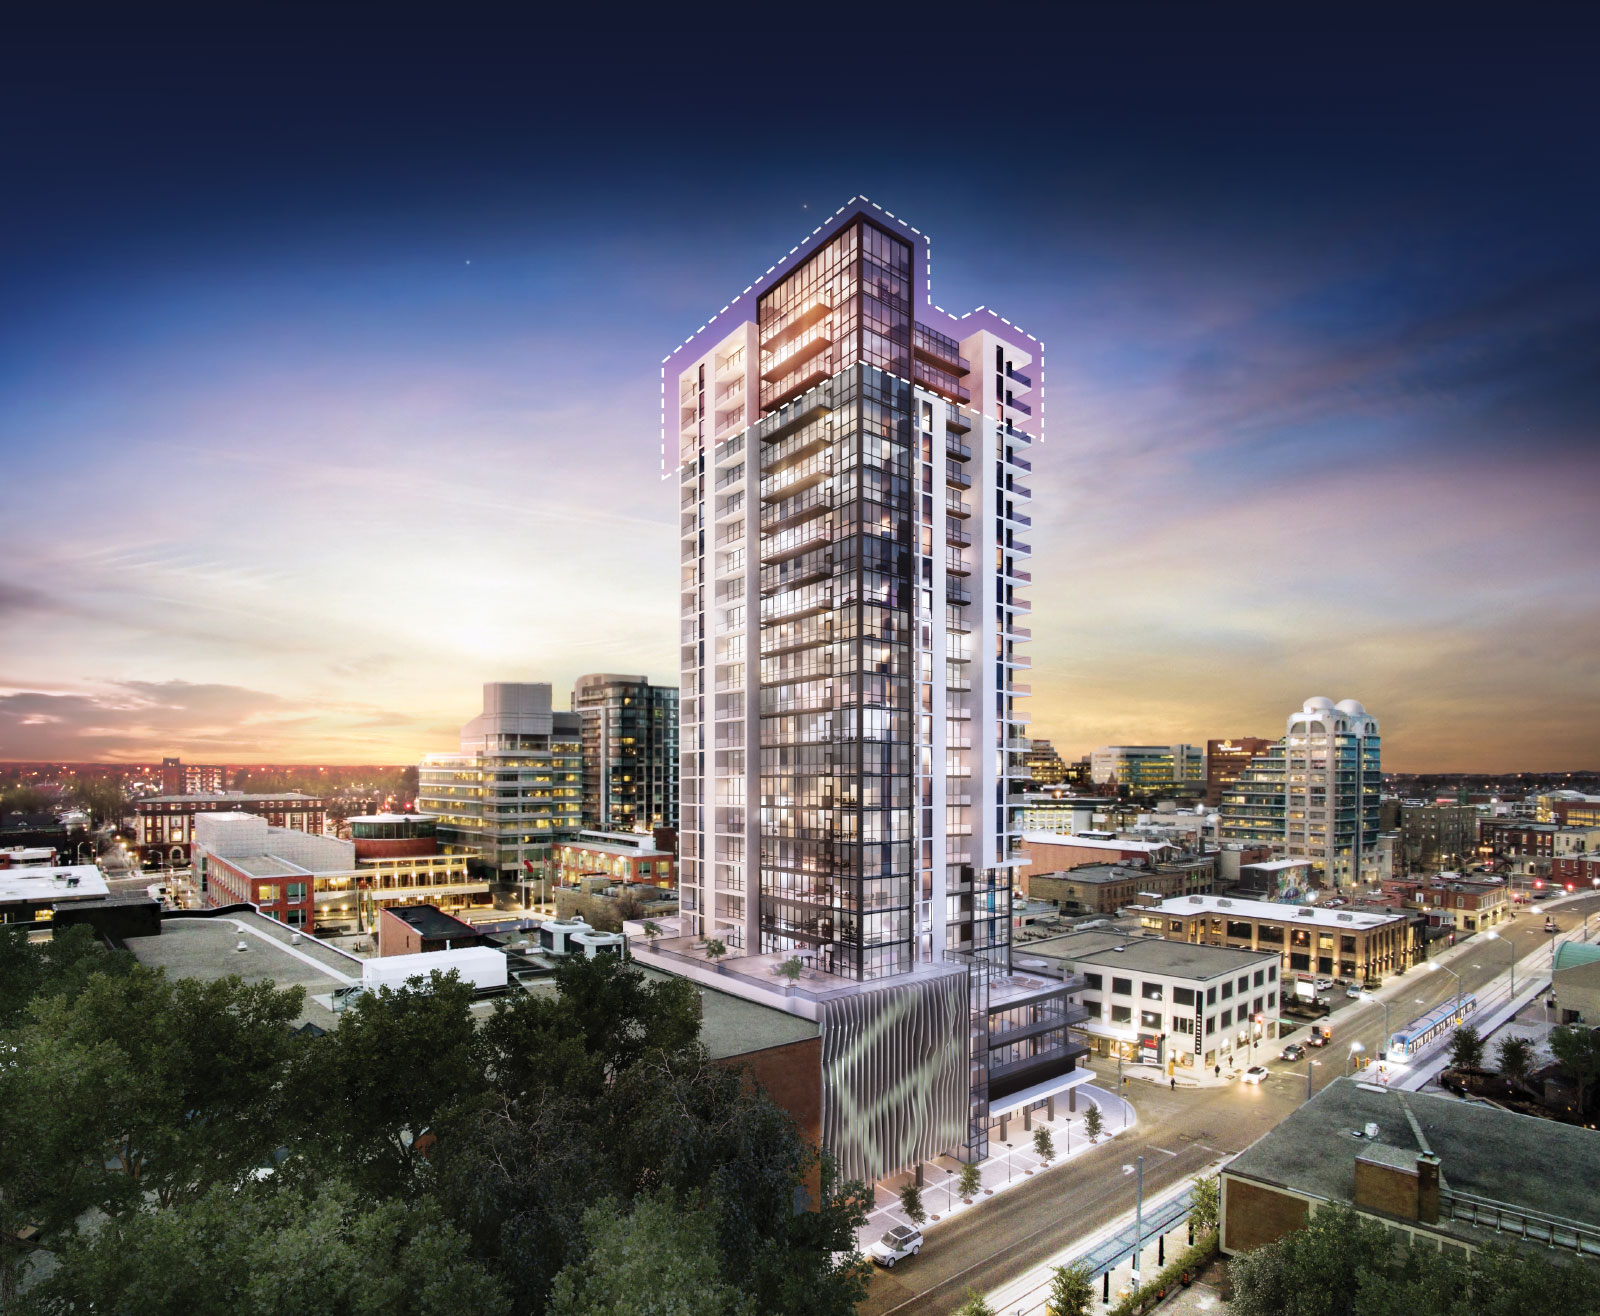 Image of Charlie West building rendering at dusk with the top three floors highlighted.